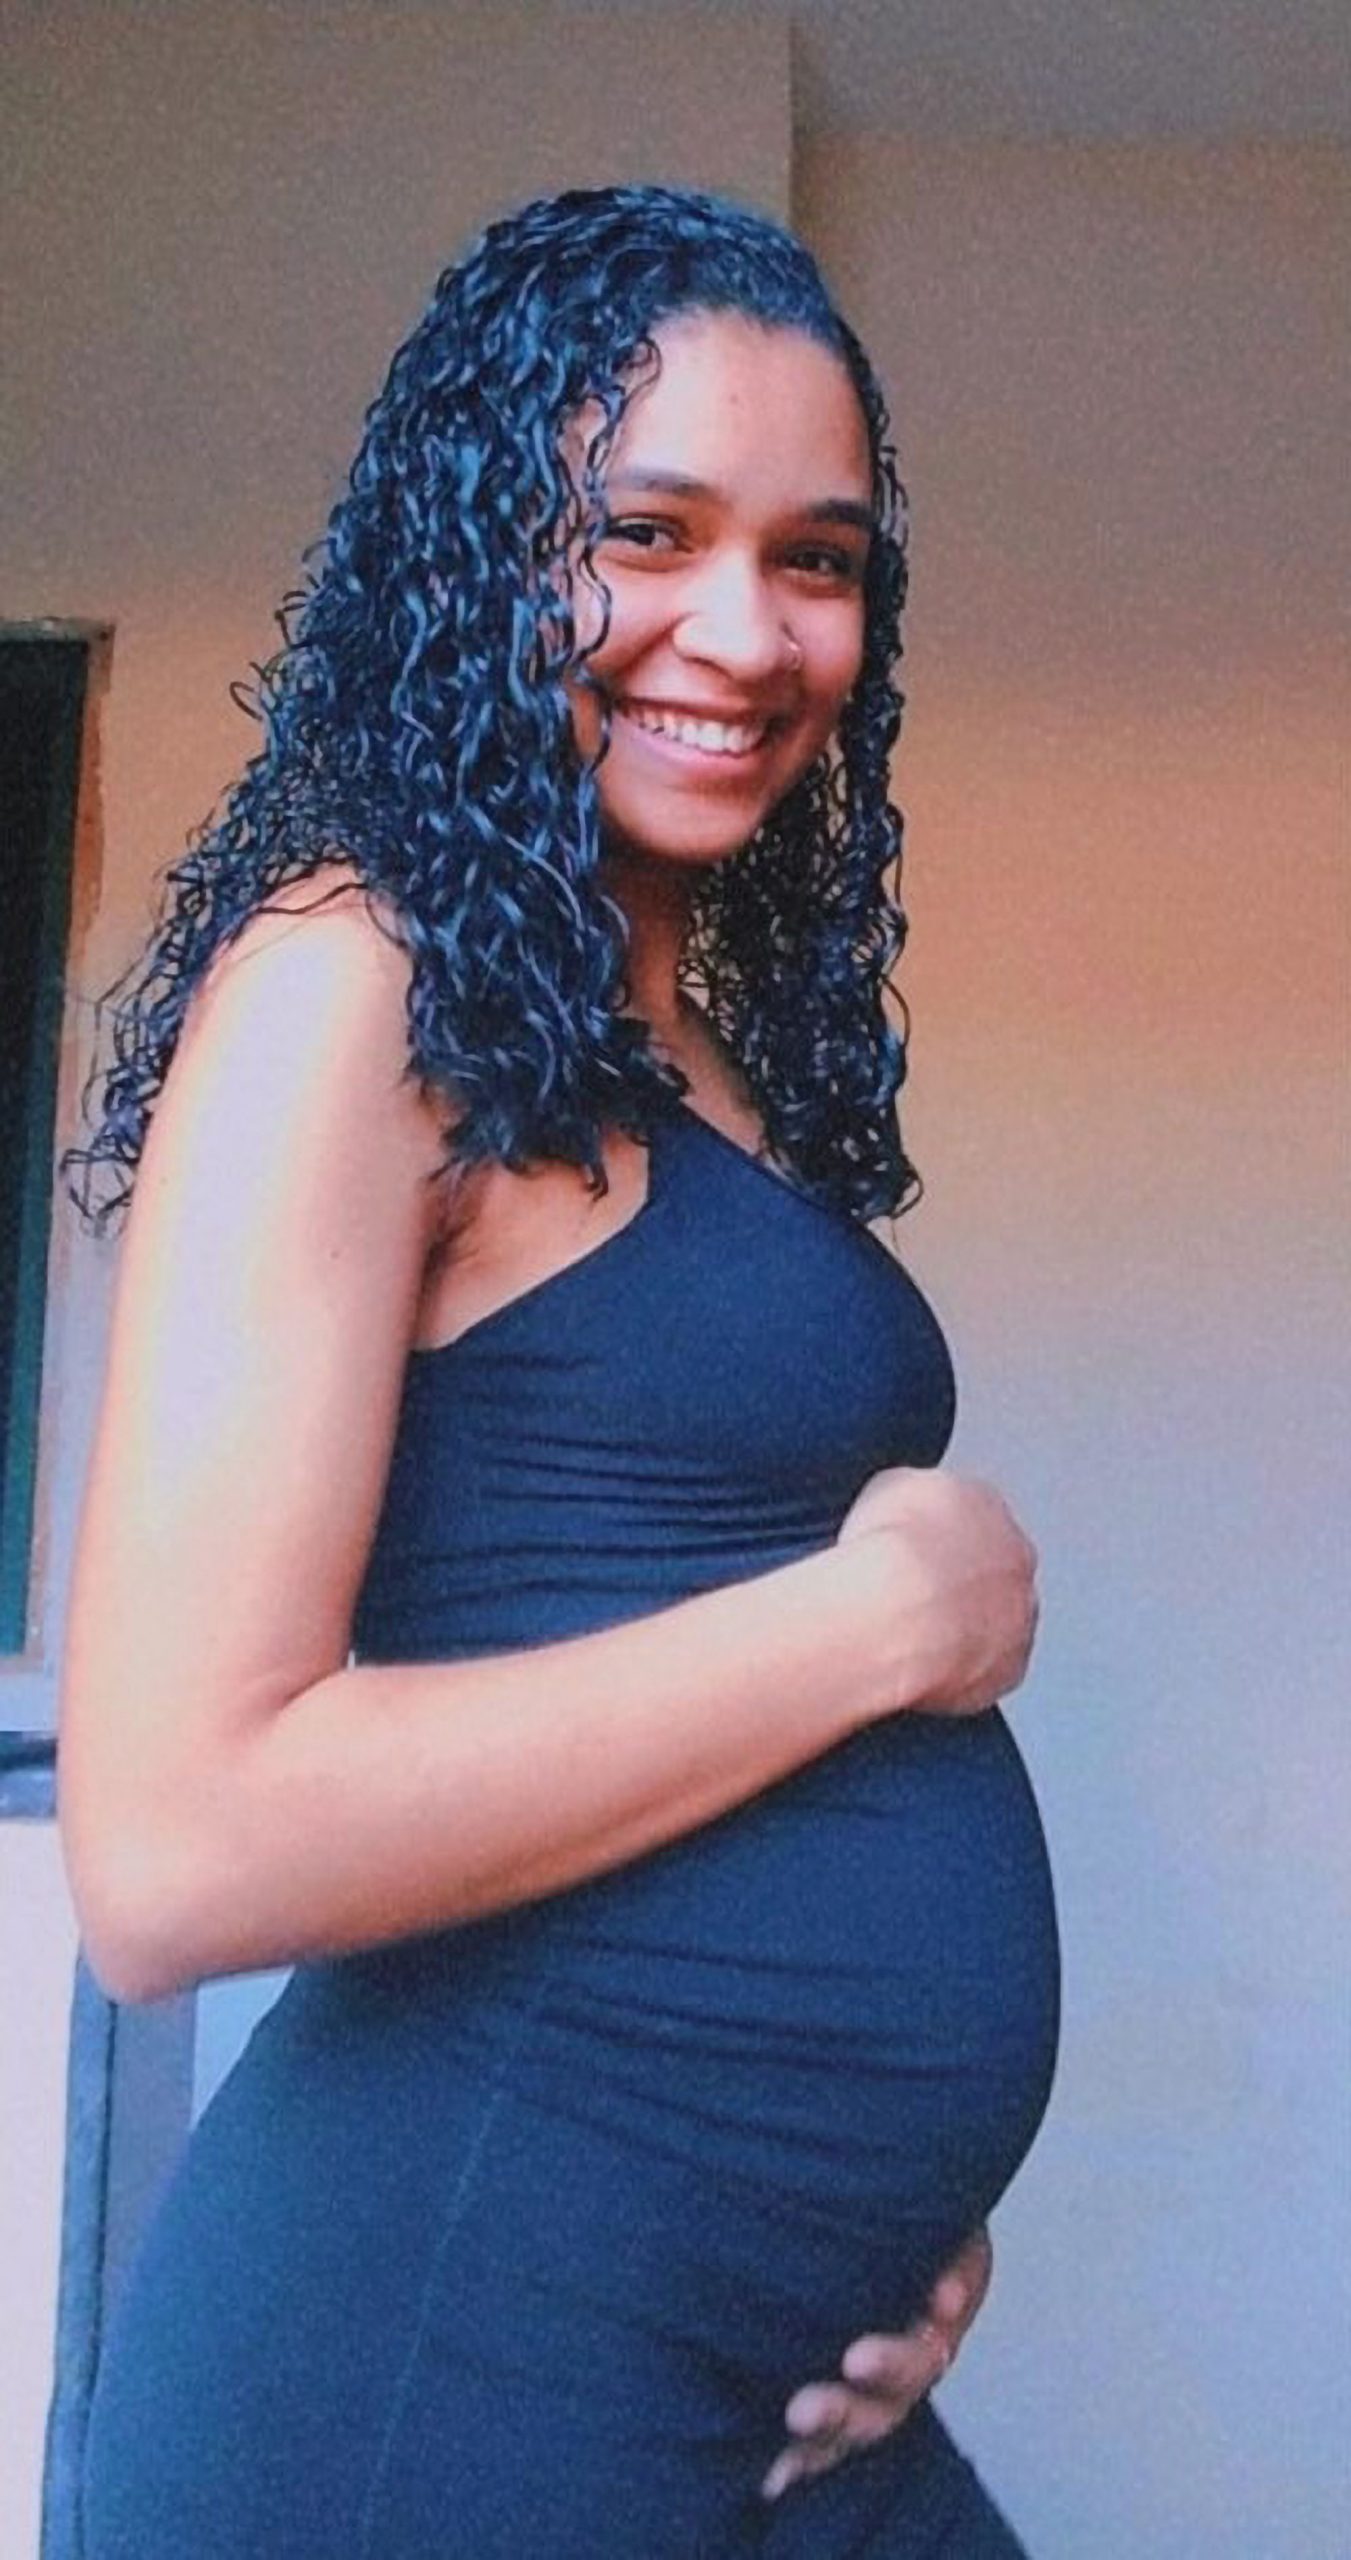 Read more about the article Pregnant Woman, 21, Killed After Baby Ripped From Her Womb